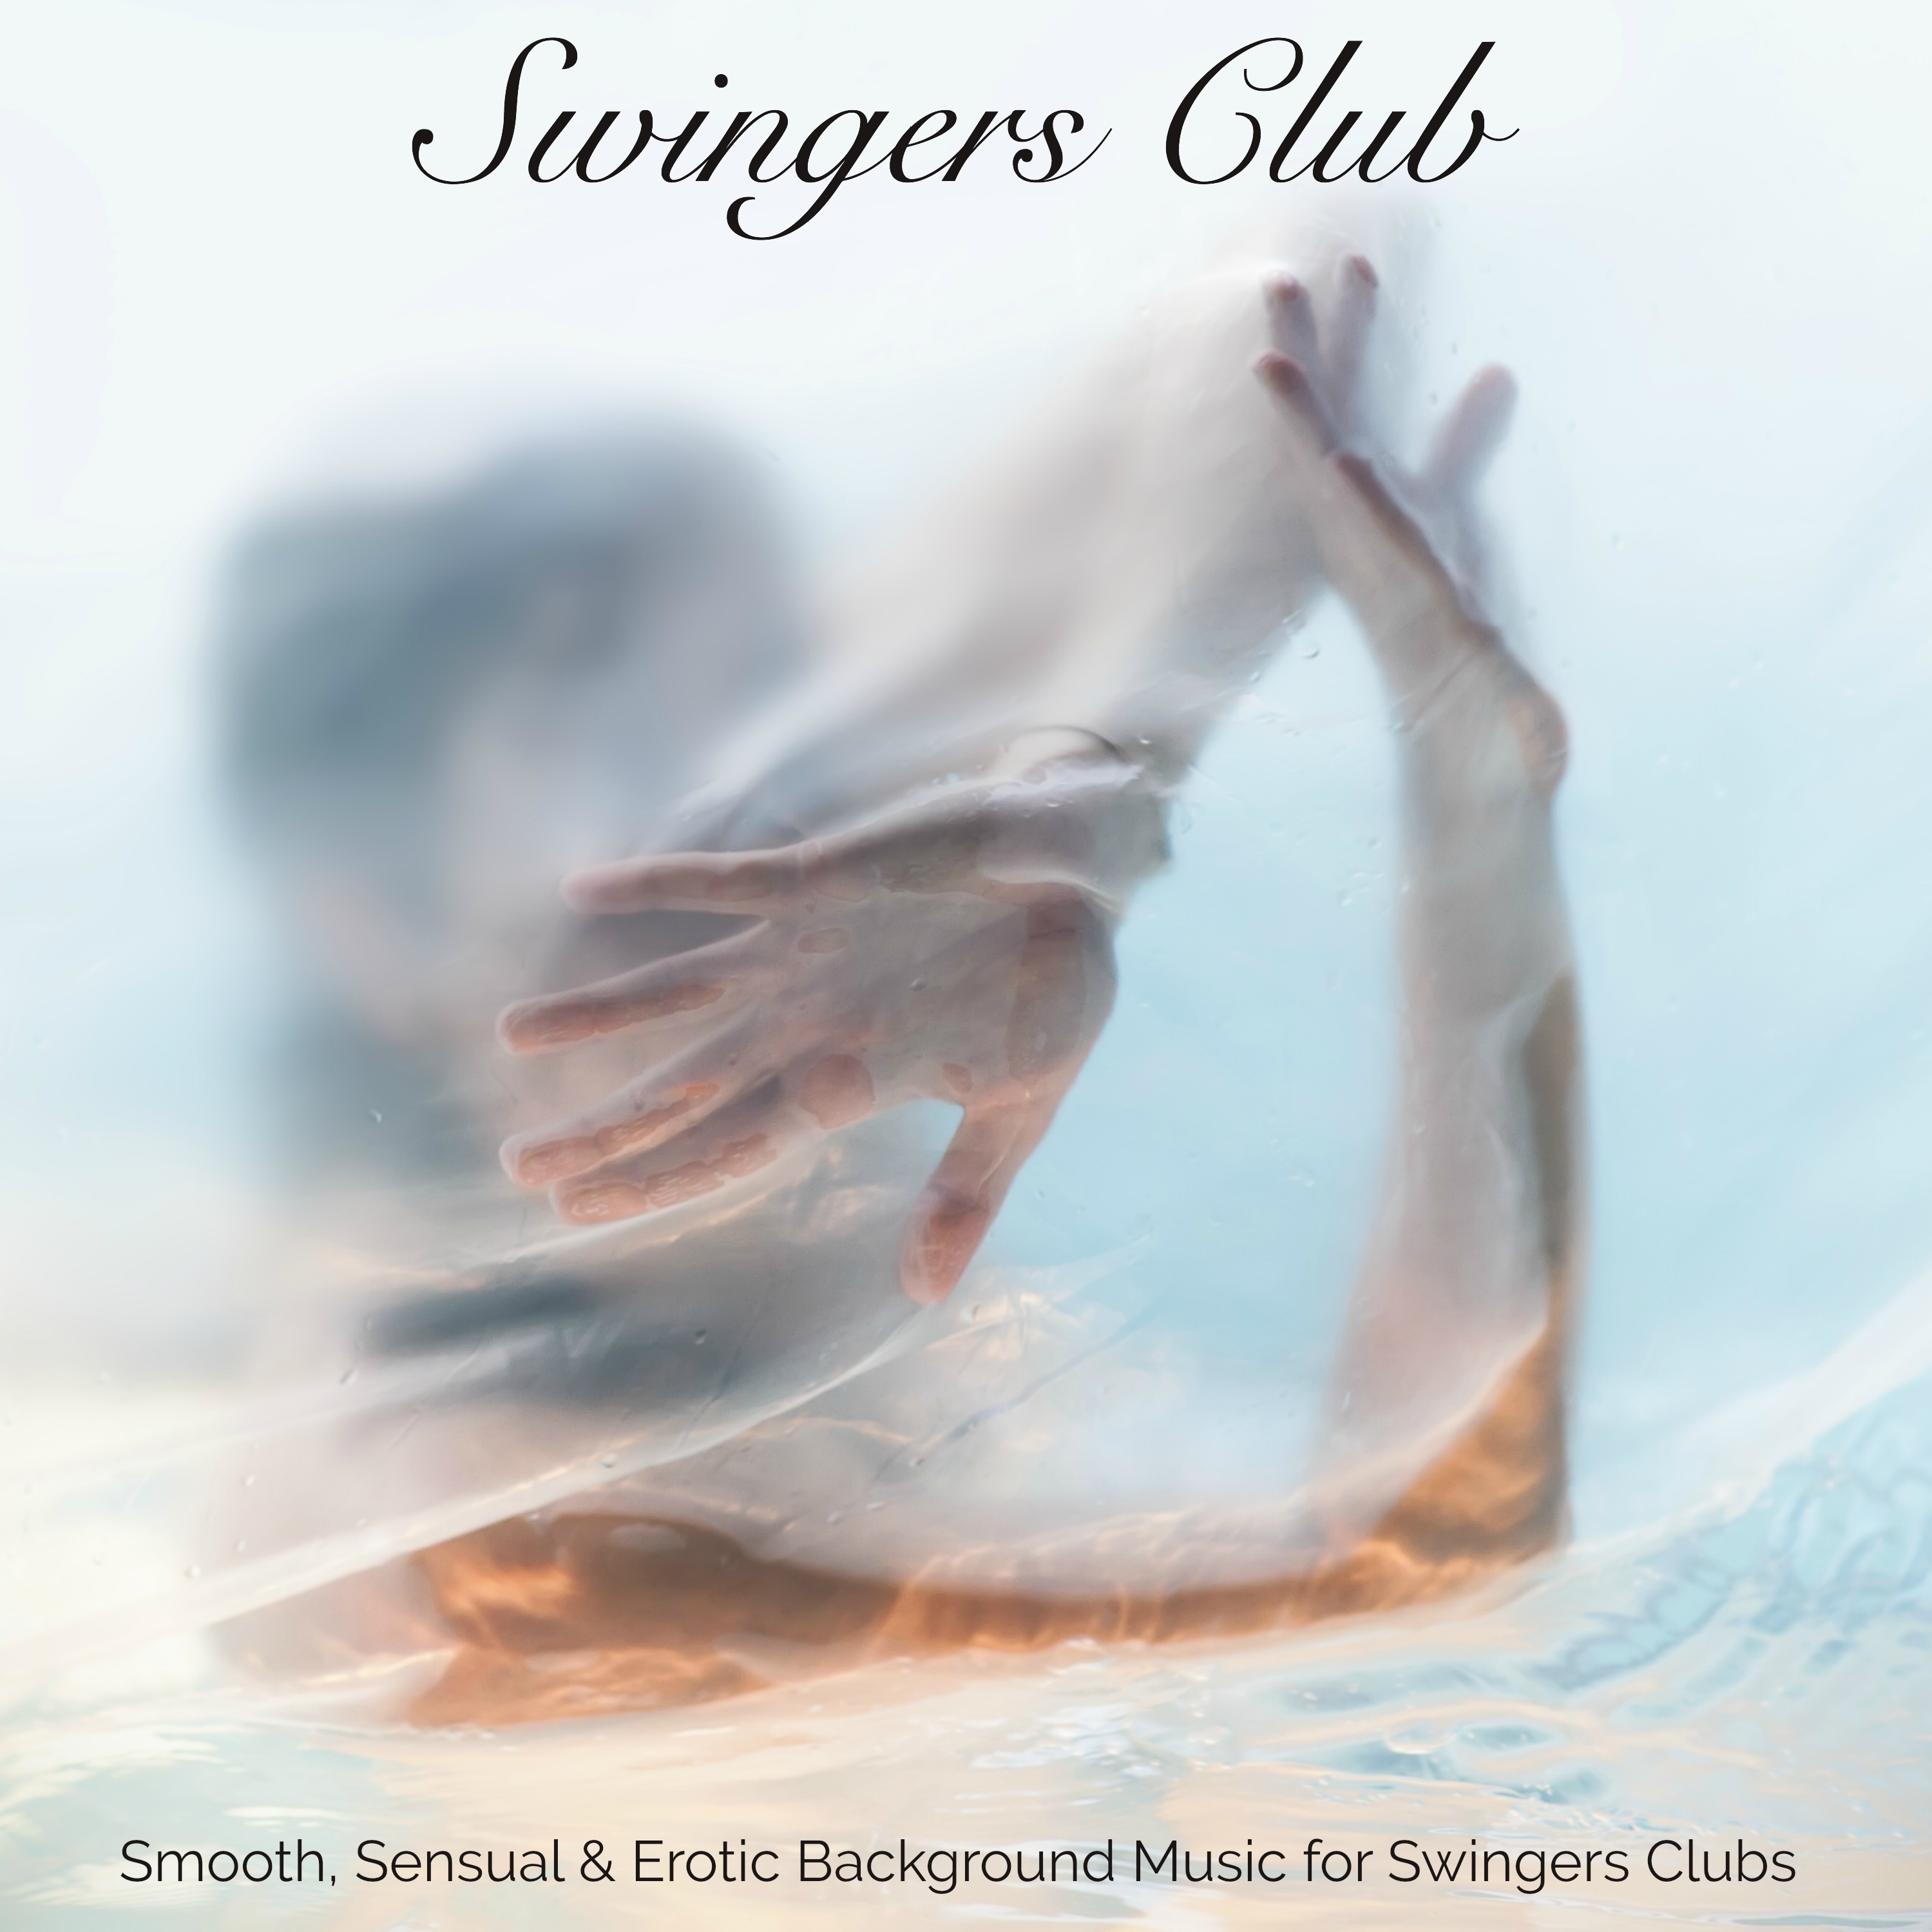 Swingers Club – Smooth, Sensual & Erotic Background Music for Swingers Clubs